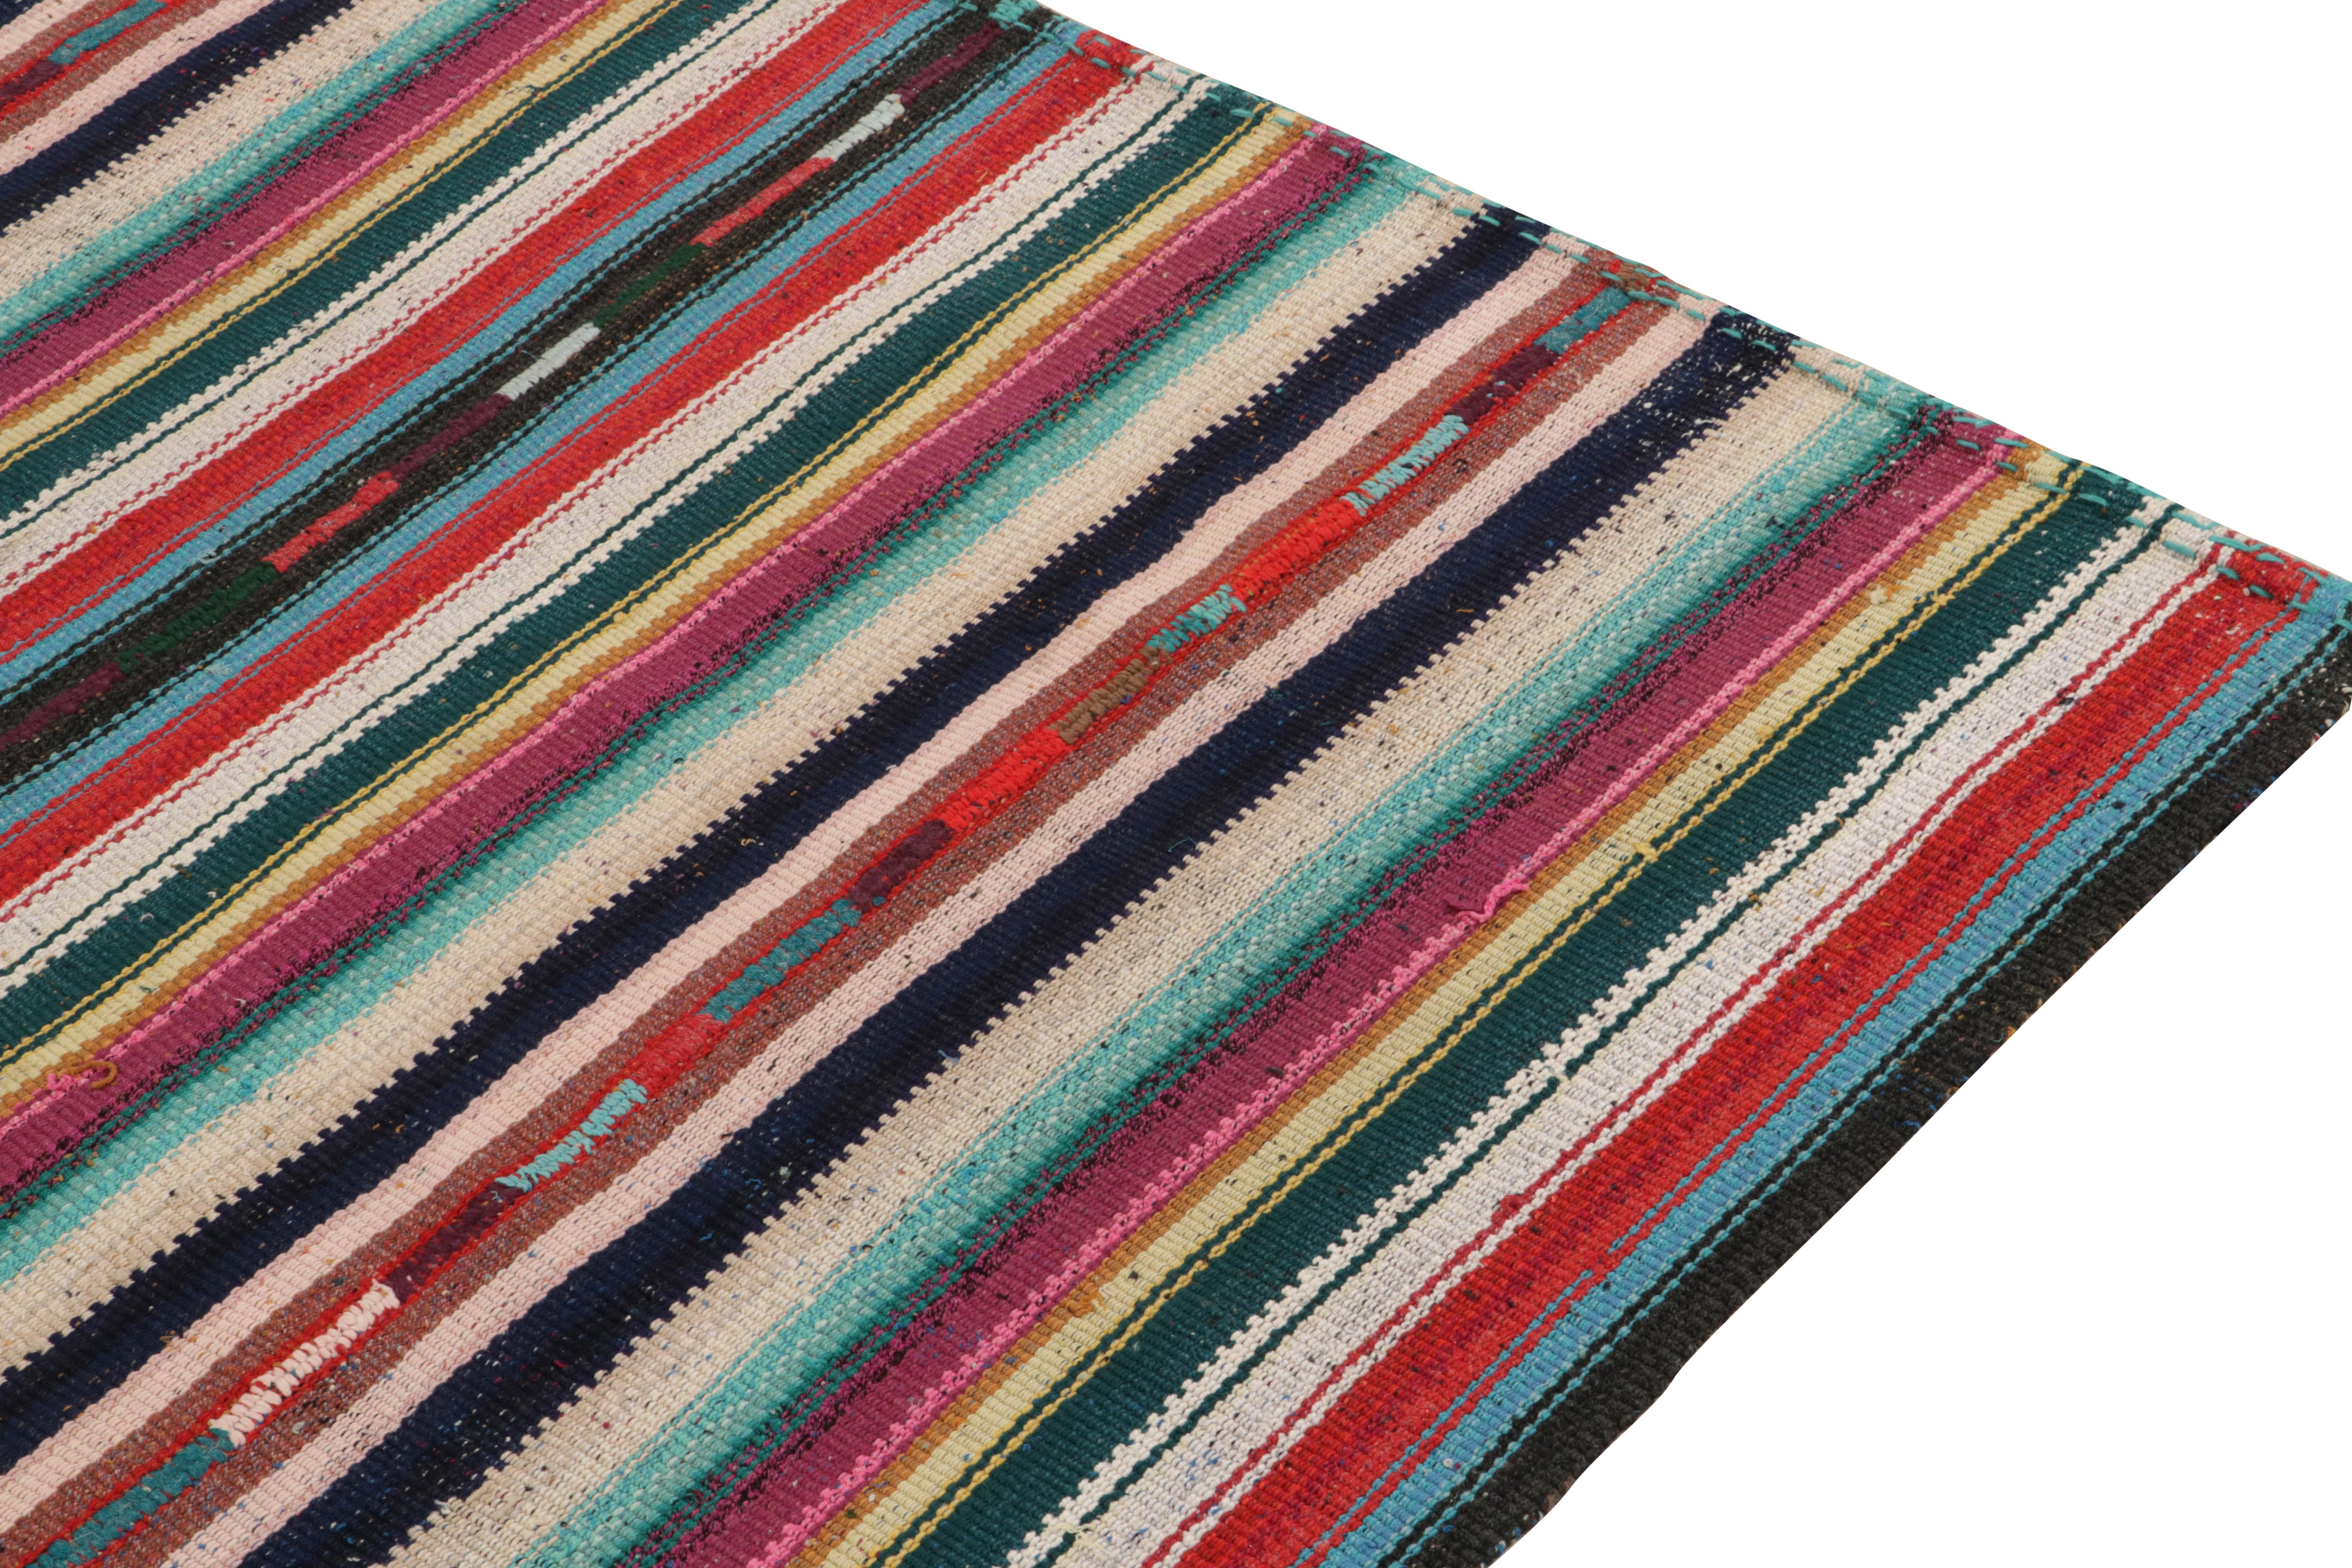 Hand-Knotted 1950s Vintage Chaput Kilim Style in Multicolor Stripe Patterns by Rug & Kilim For Sale